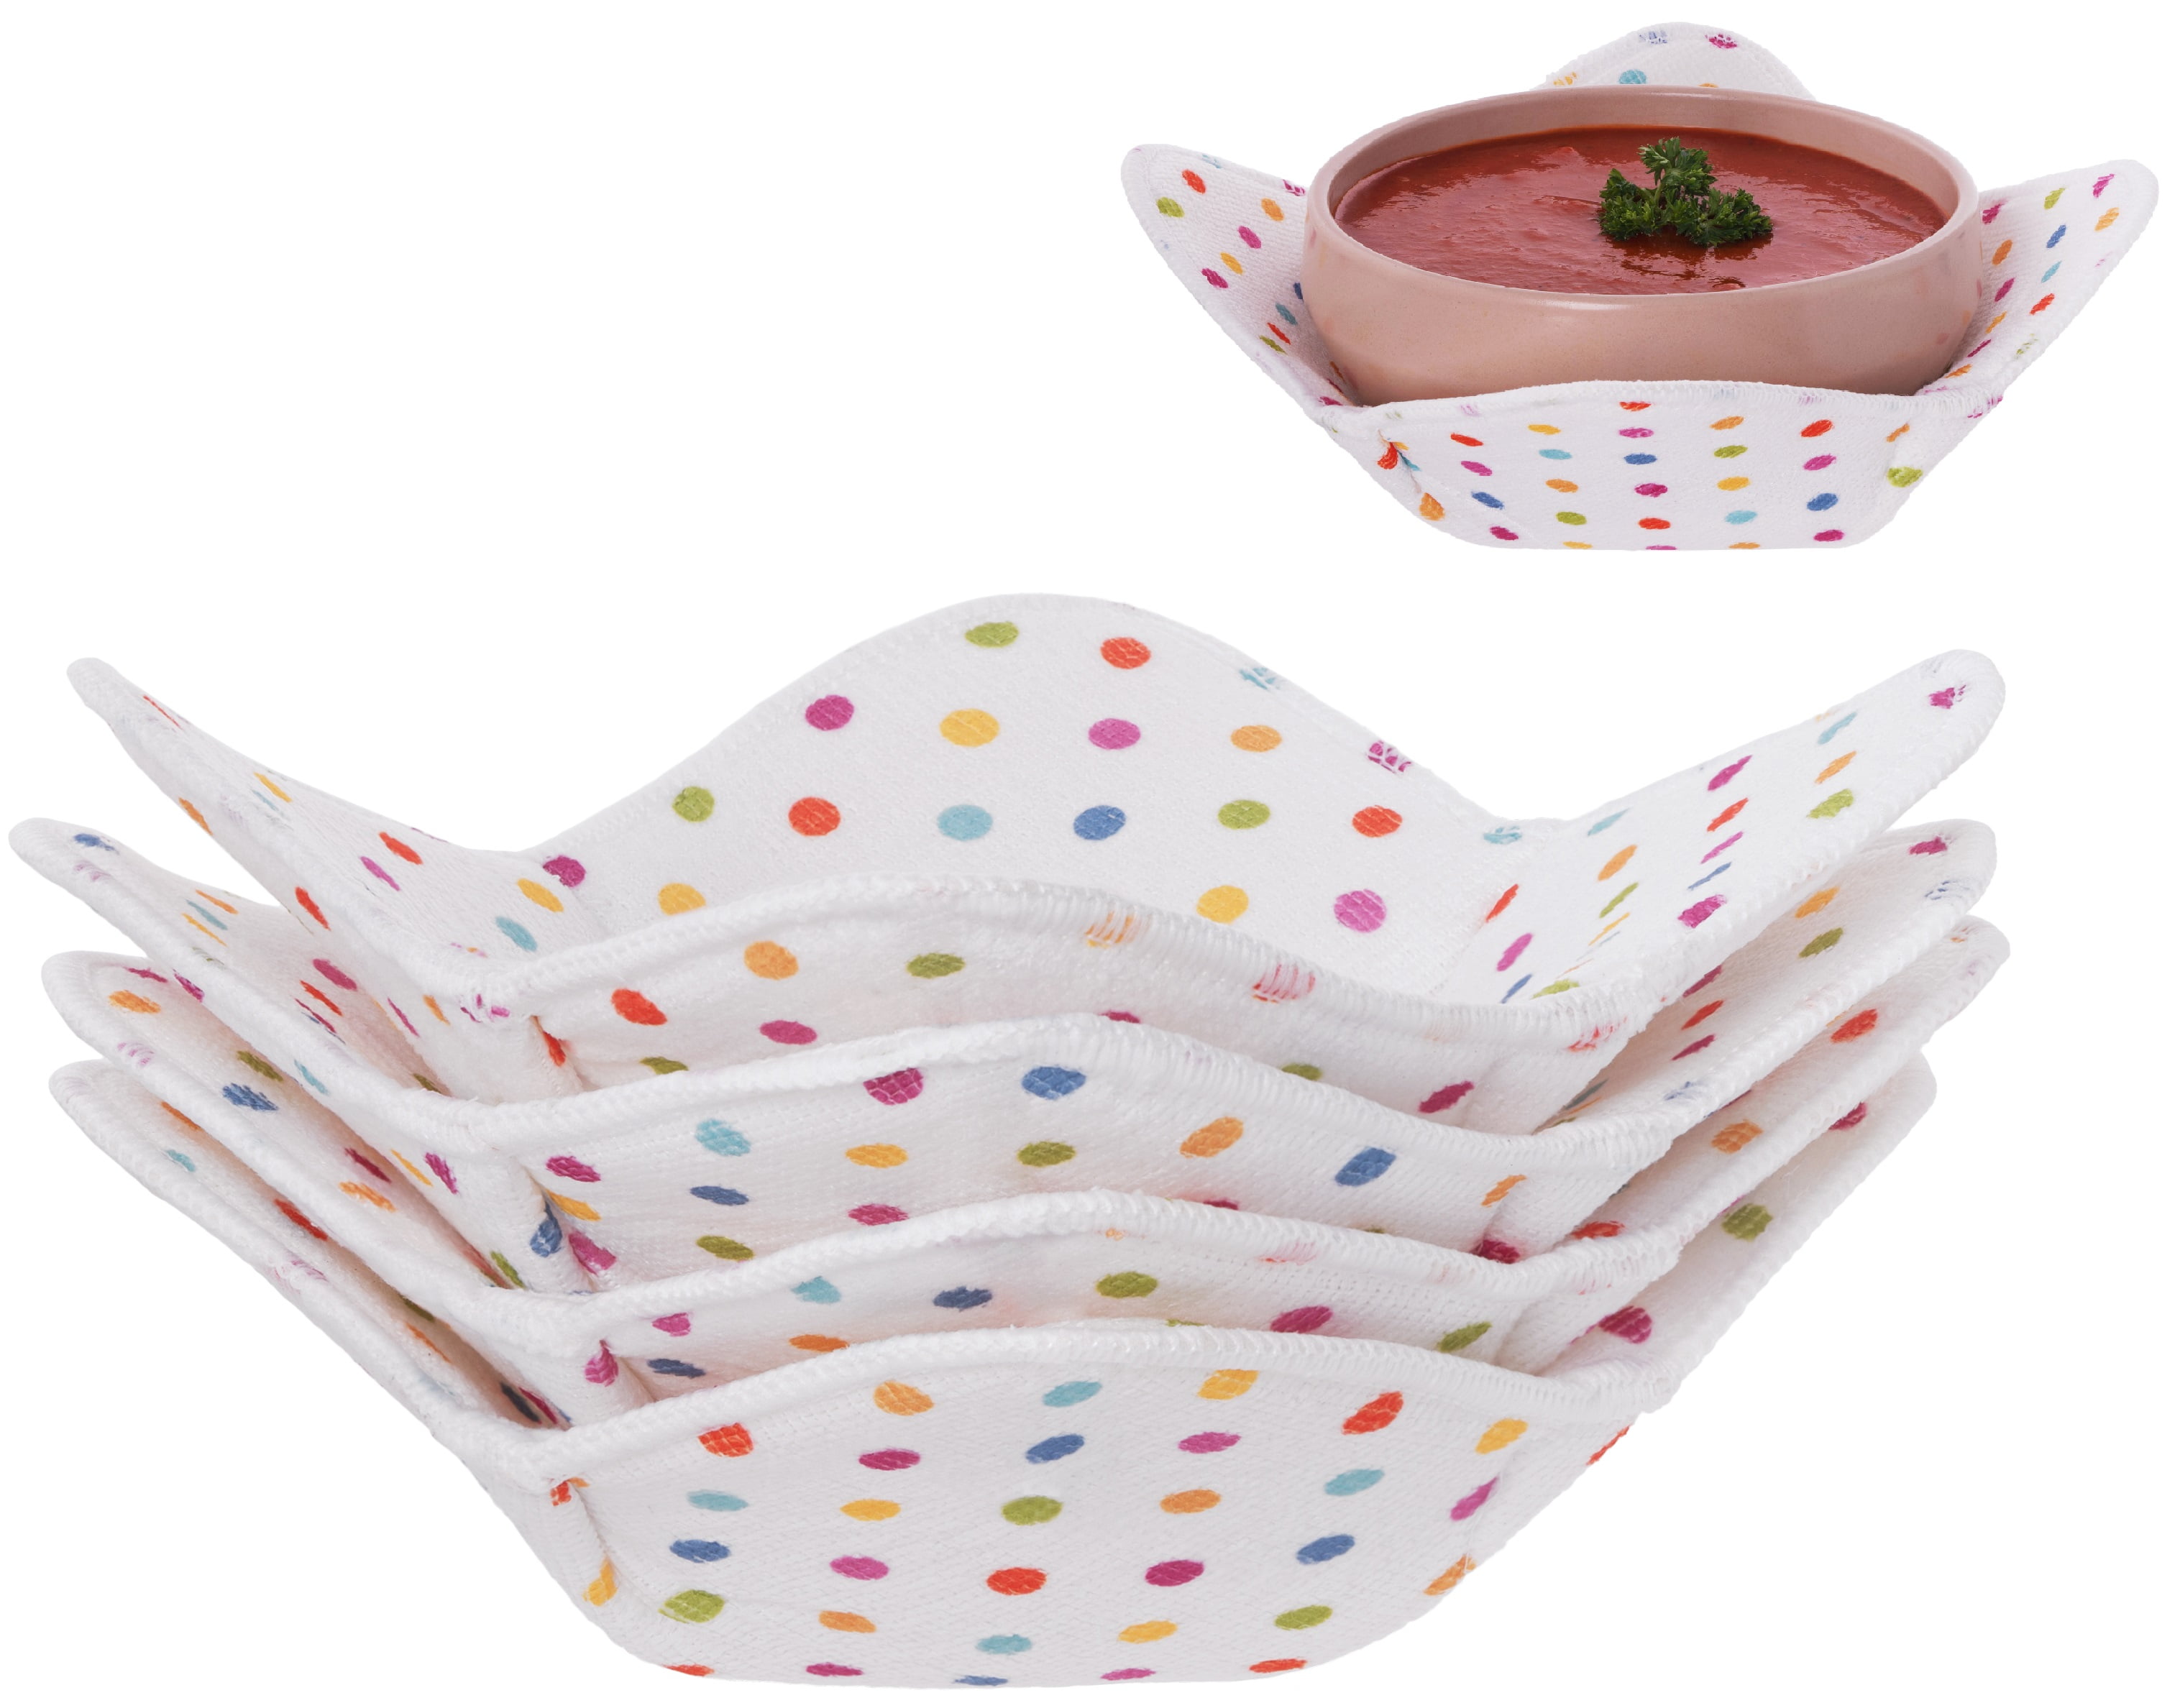 Microwave Bowl Cozy Microwave Safe Bowl Holders 6pcs Bowl Cozy  Huggers Plates Dishes Protectors Hot Food Bowl Pads Microwave Hand Warmers  for Heating Soup Meals Microwave Bowl Mats: Soup Bowls